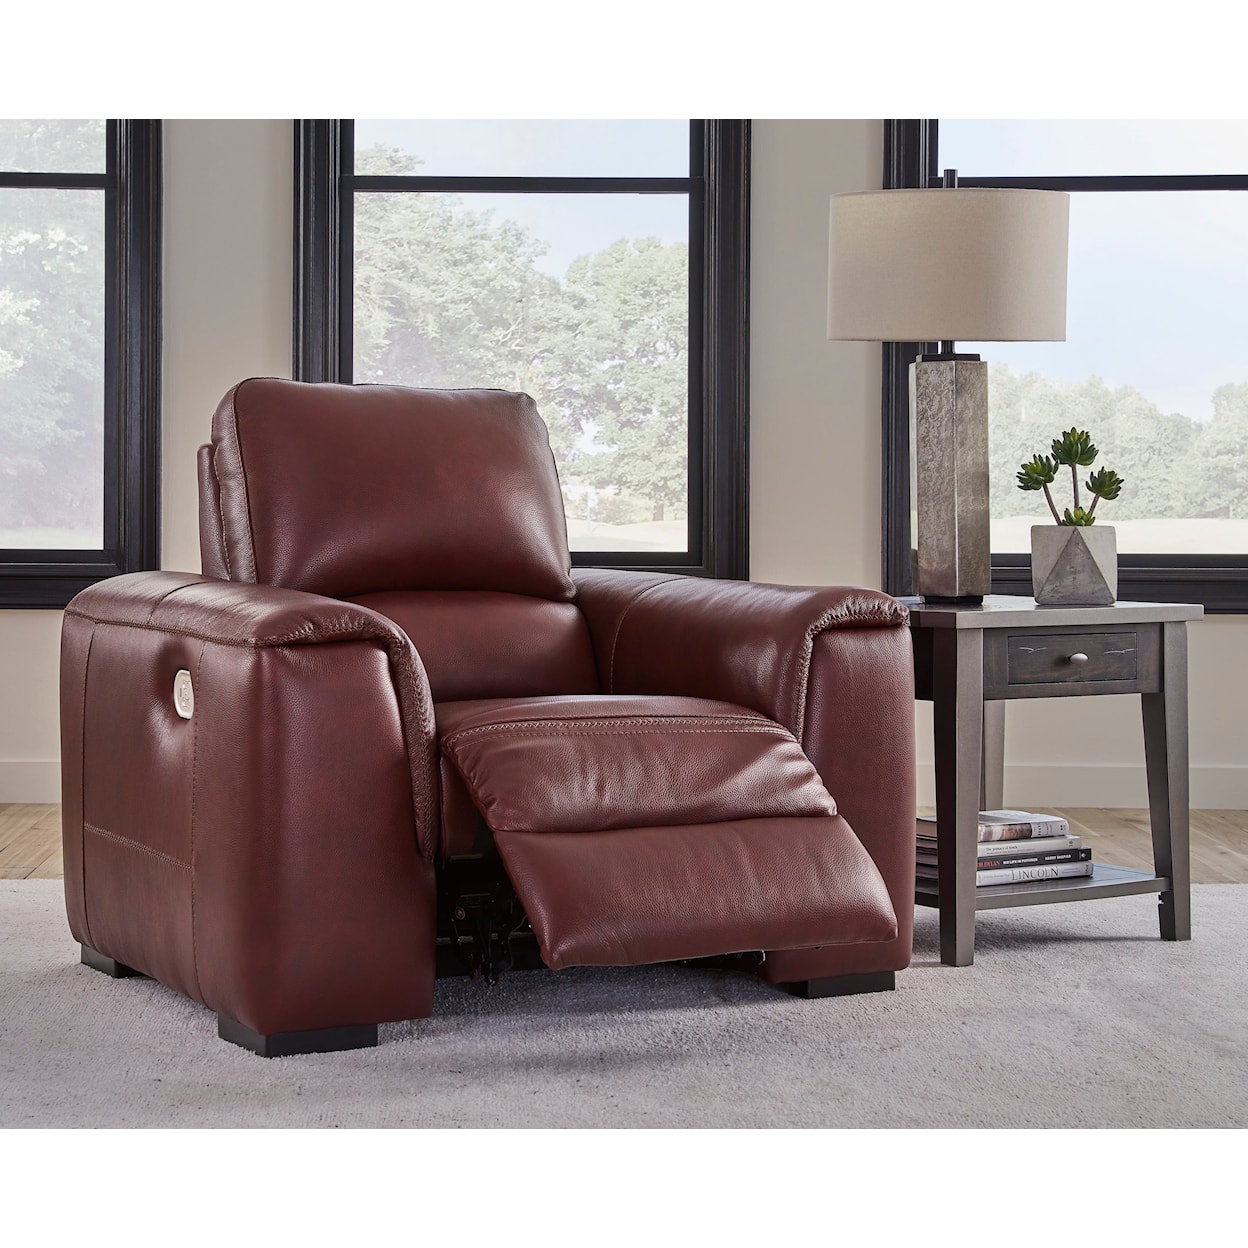 Signature Design by Ashley Alessandro Power Recliner